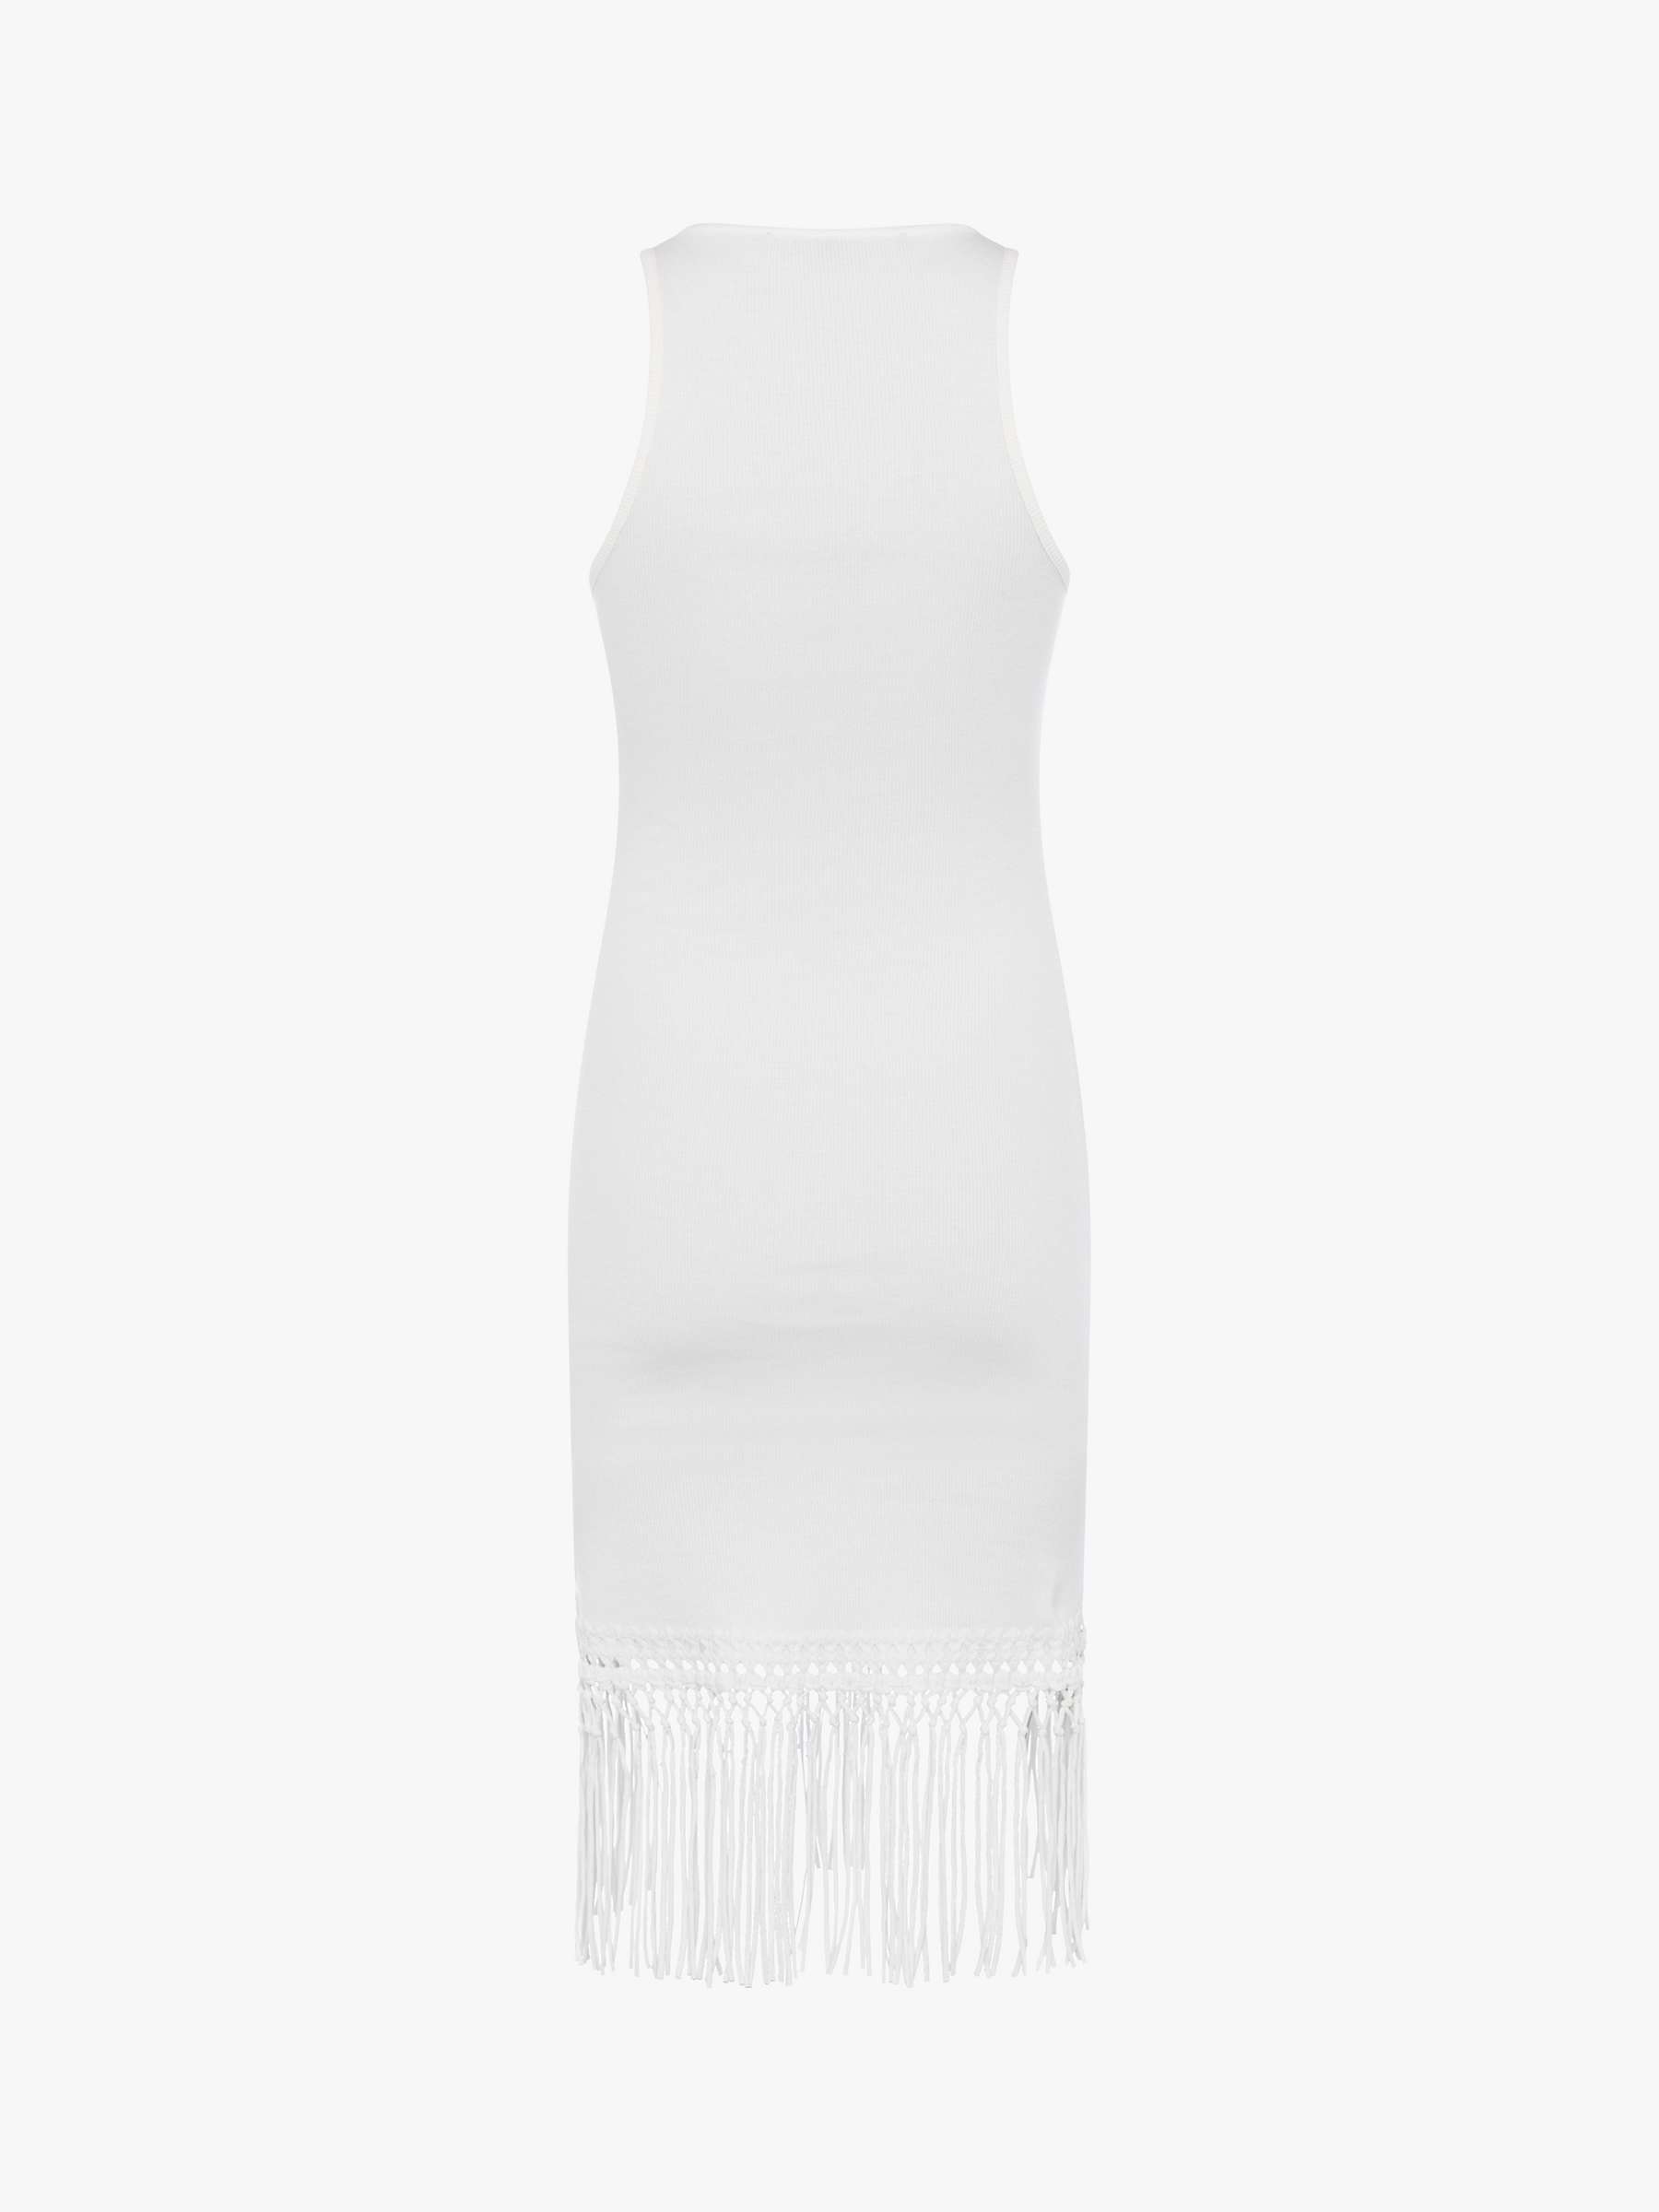 Buy French Connection Solle Tassle Mini Dress Online at johnlewis.com